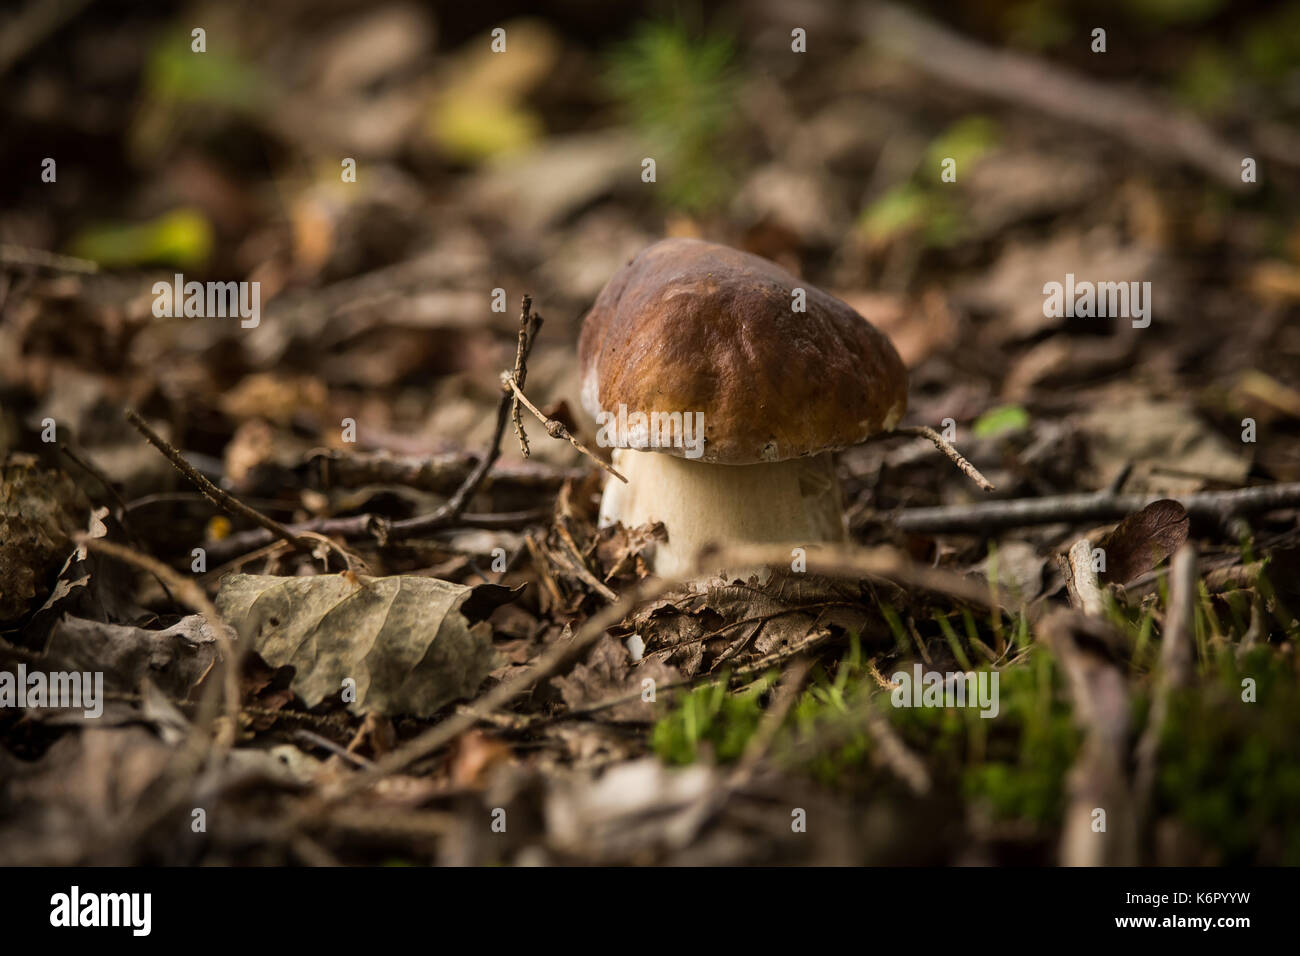 A beautiful mushrooms growing in the autumn forest Stock Photo